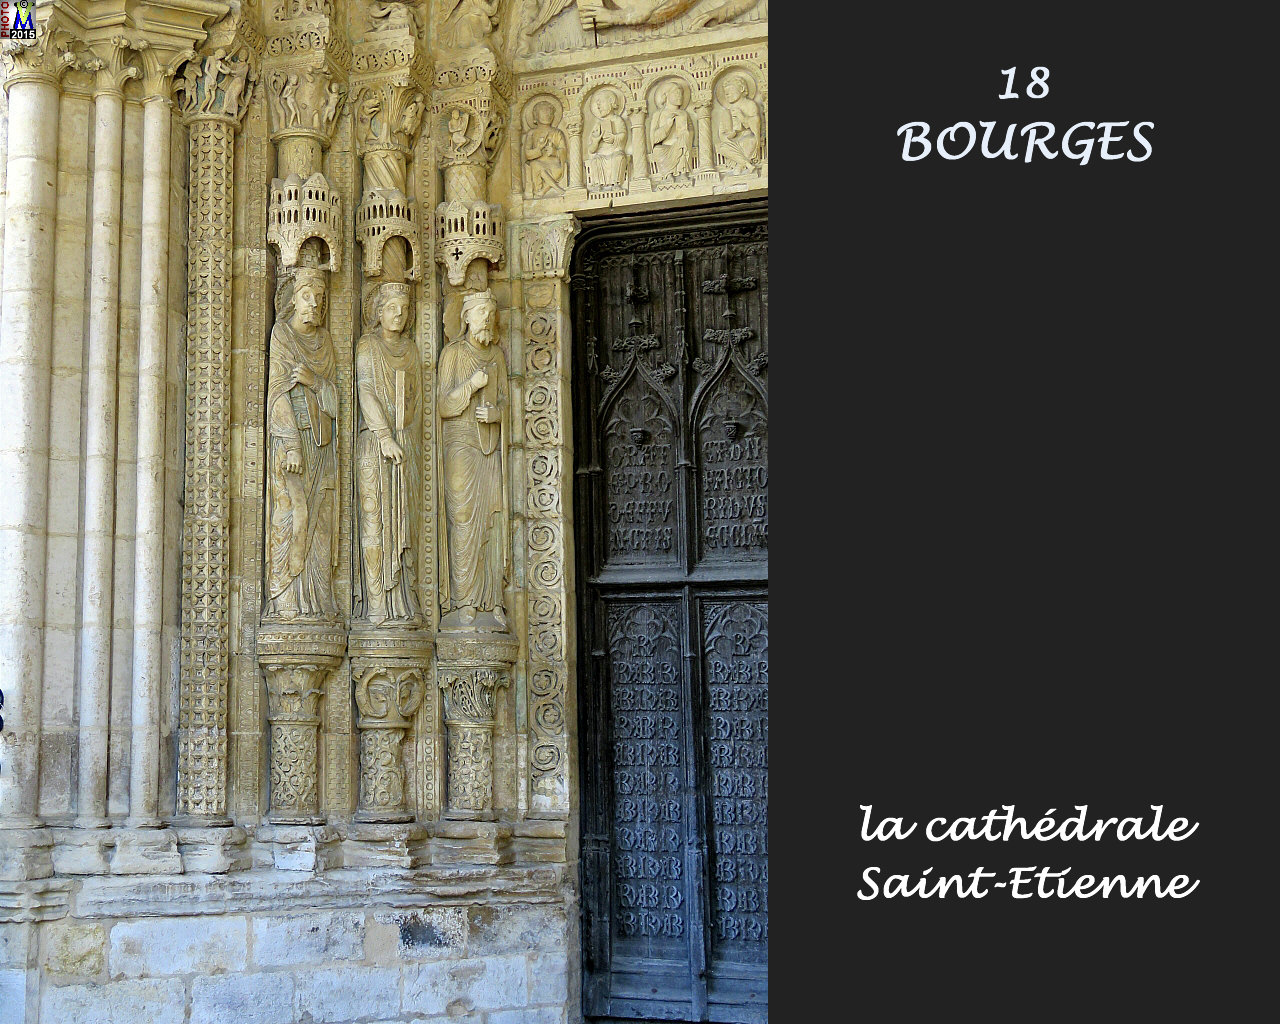 18BOURGES-cathedrale_254.jpg